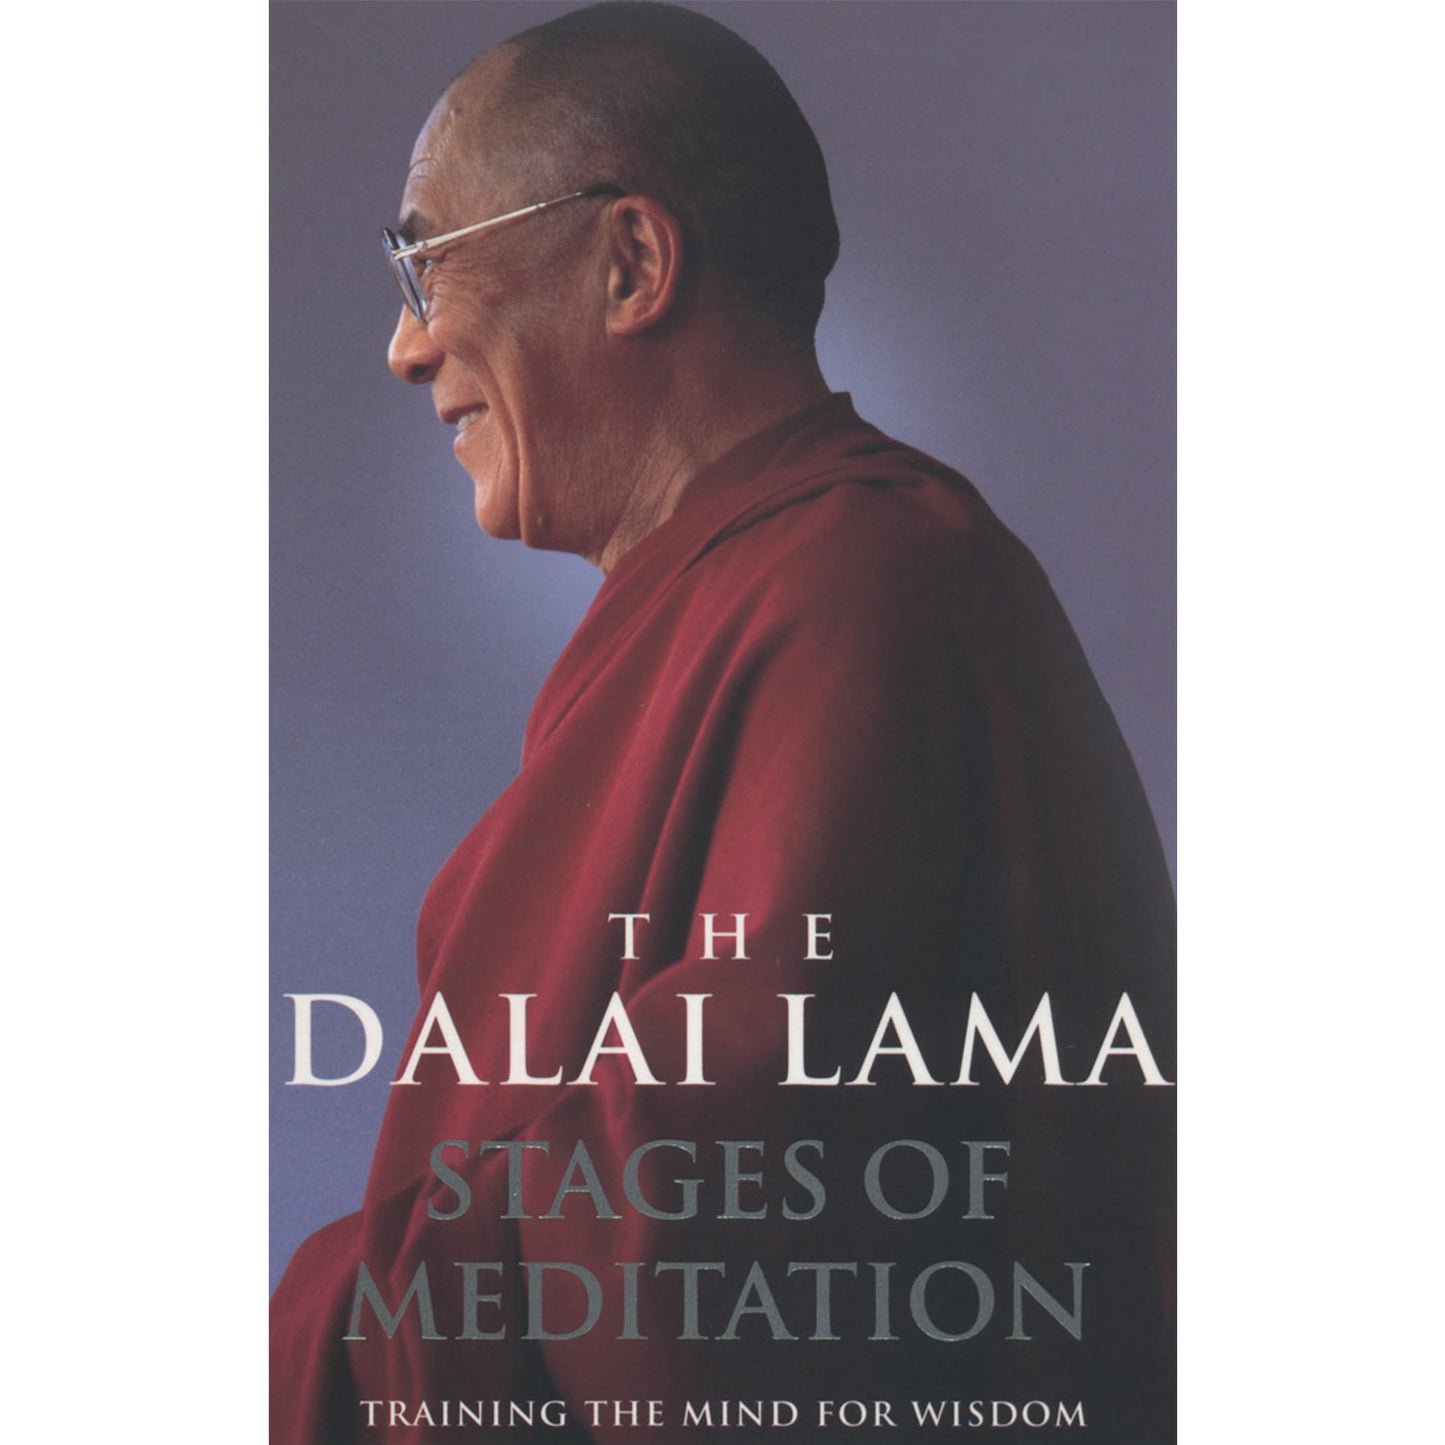 Stages of Meditation by Dalai Lama